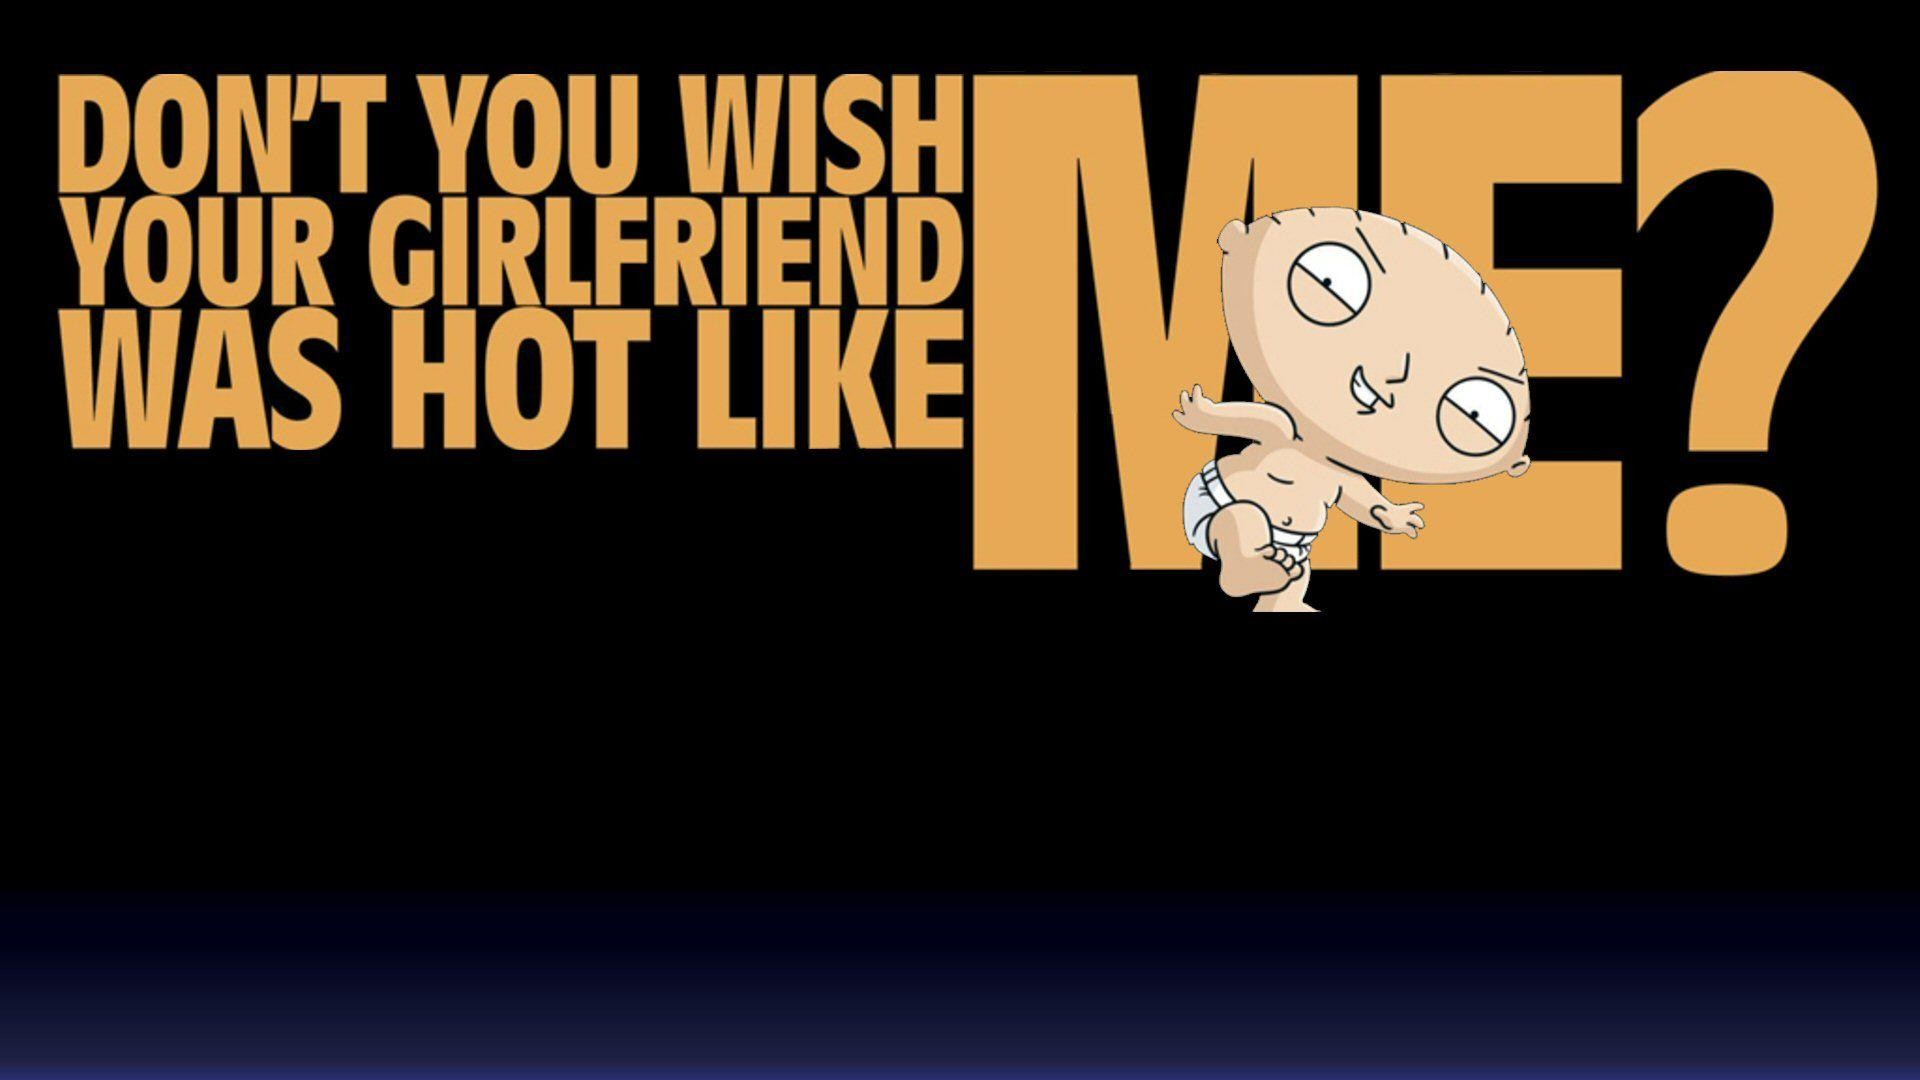 1920x1080 Stewie Images 99319 High Definition Wallpapers | Suwall.